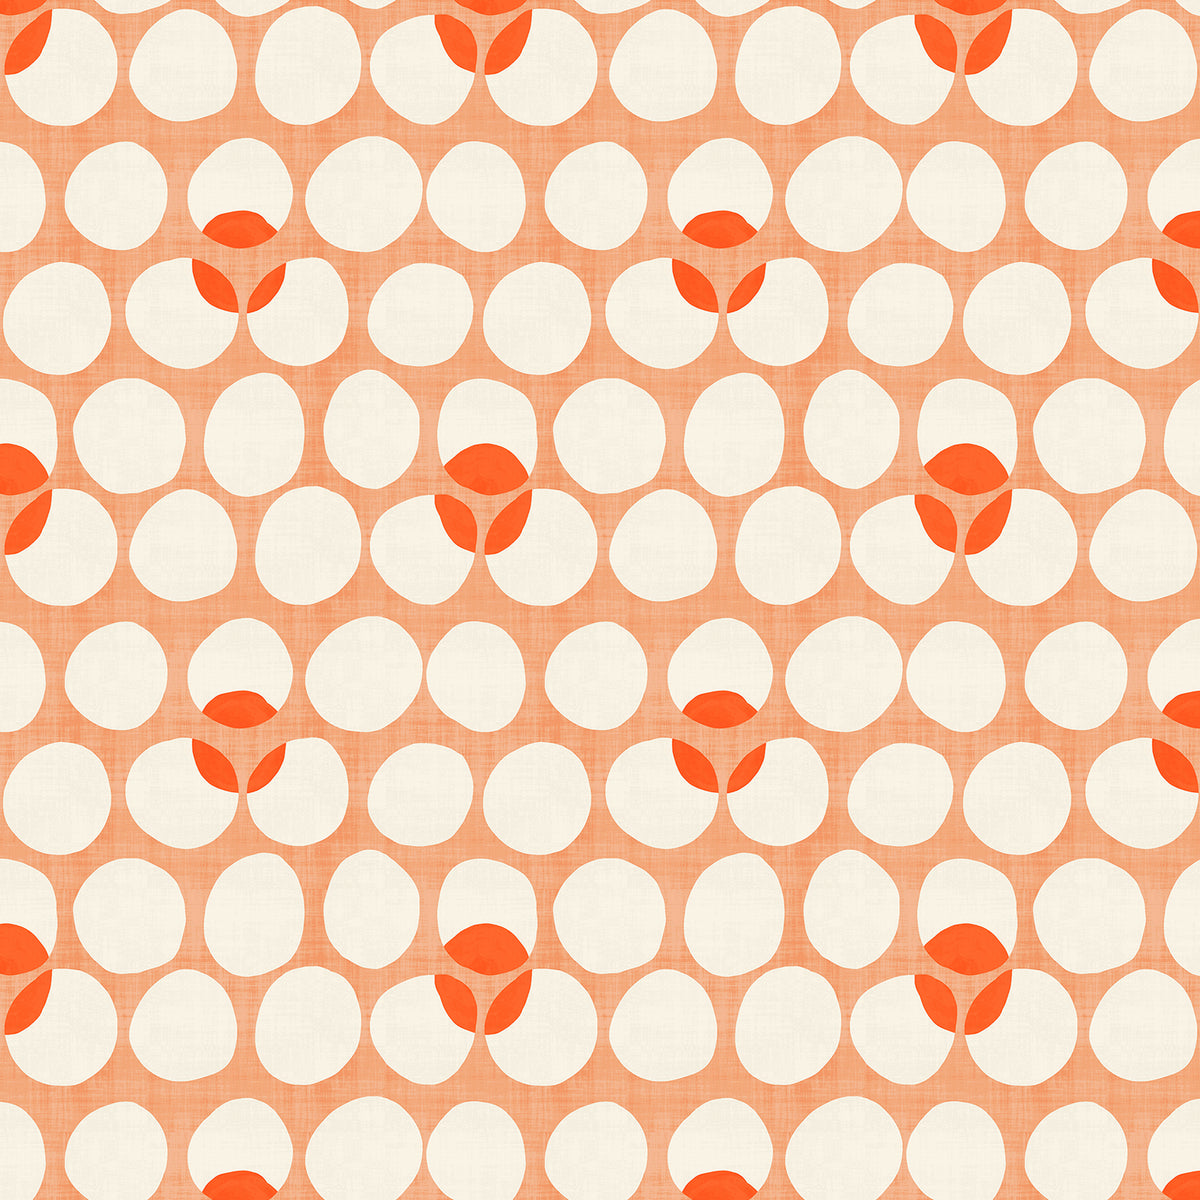 Wide Open Spaces Quilt Fabric - Just Around the Riverbend in Fire Peach/Orange - RJ3404-FI2